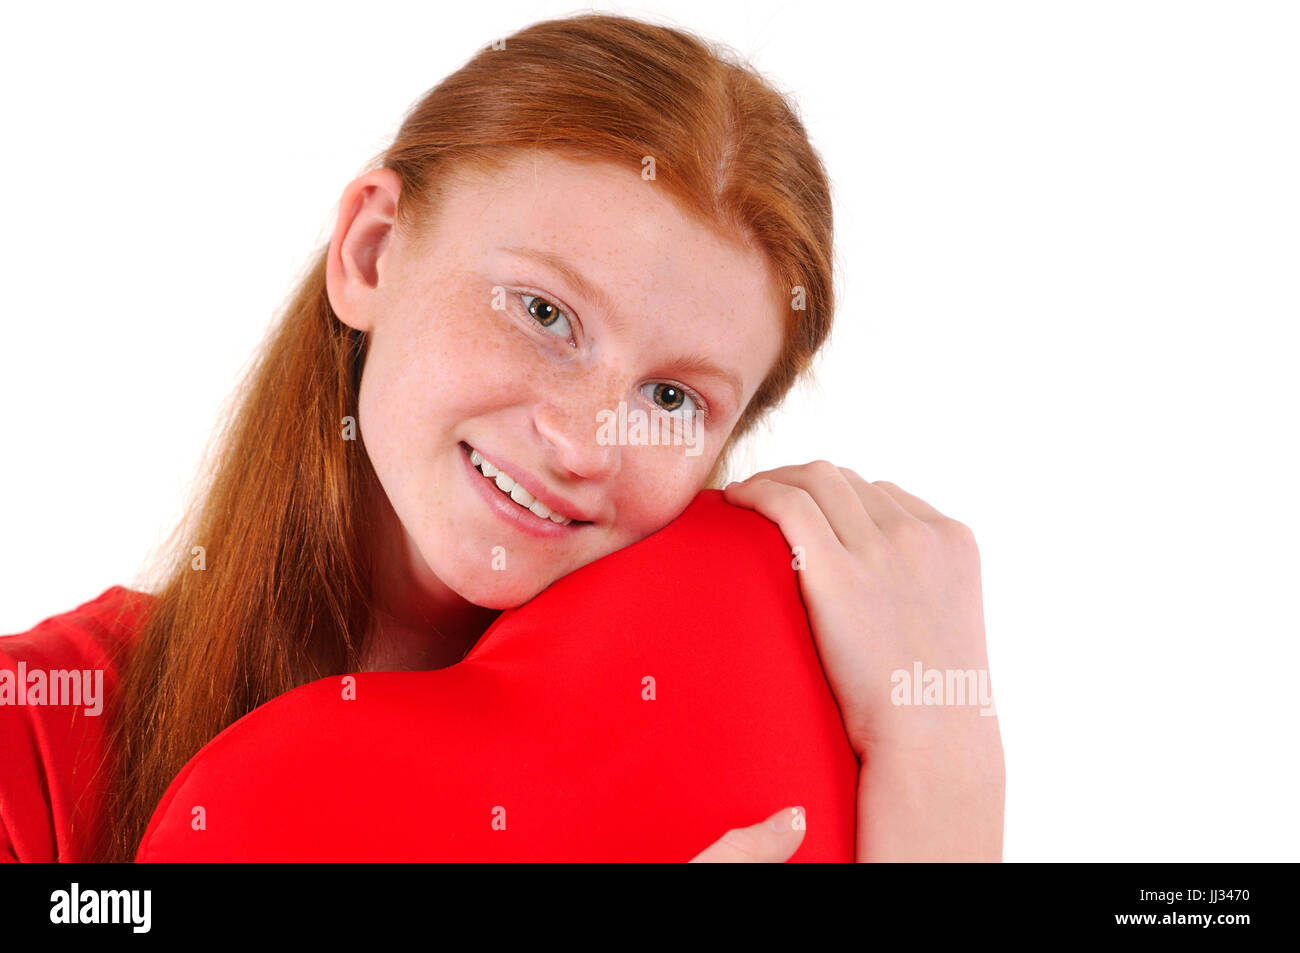 Young red hair girl tenderly hug a heart shape on white background. Happy smiling lifestyle people concept. Human emotions. Stock Photo